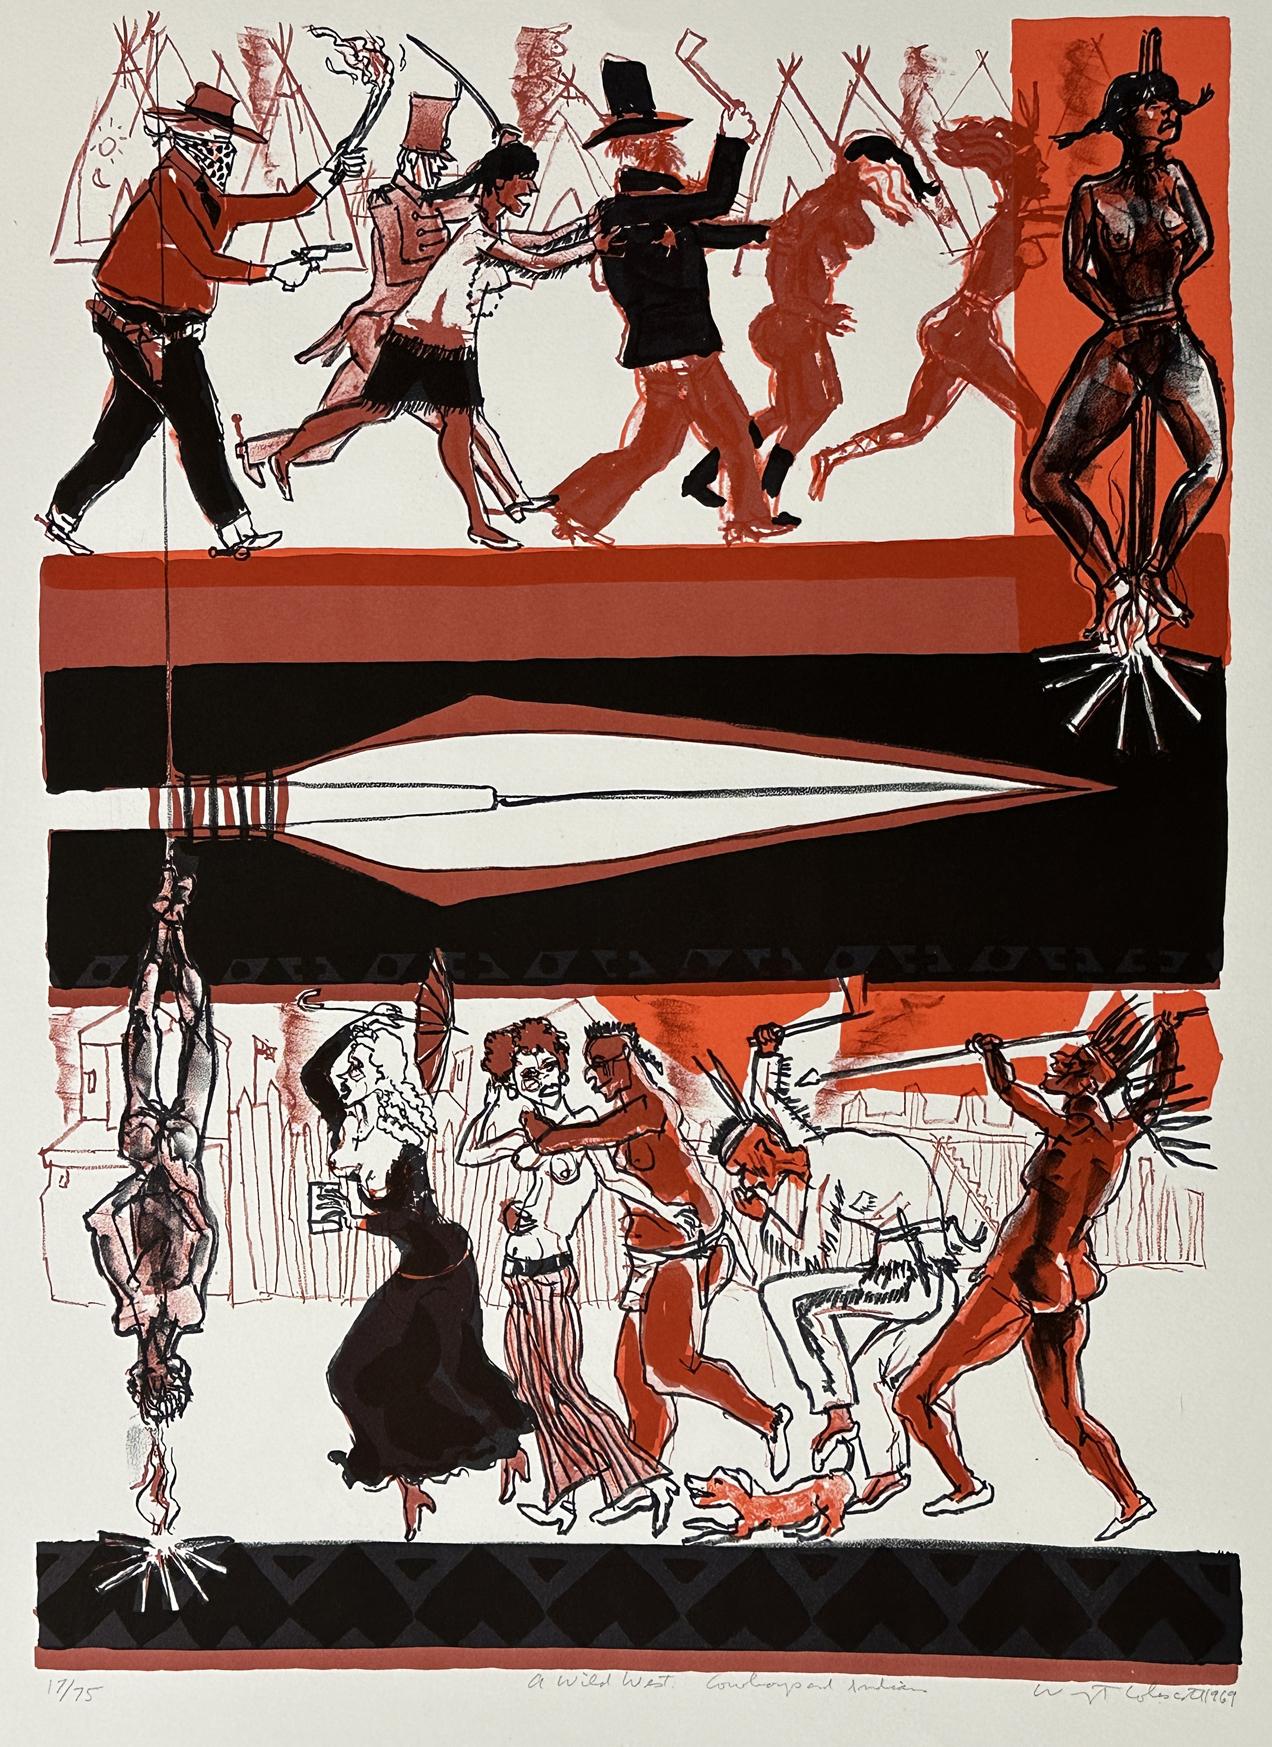 Warrington Colescott
A Wild West: Cowboys and Indians - 1969
Print - Lithograph   23'' x 31''
Edition: signed and numbered in pencil 17/75

Unframed

Warrington Wickham Colescott Jr. was an American artist, he is best known for his satirical